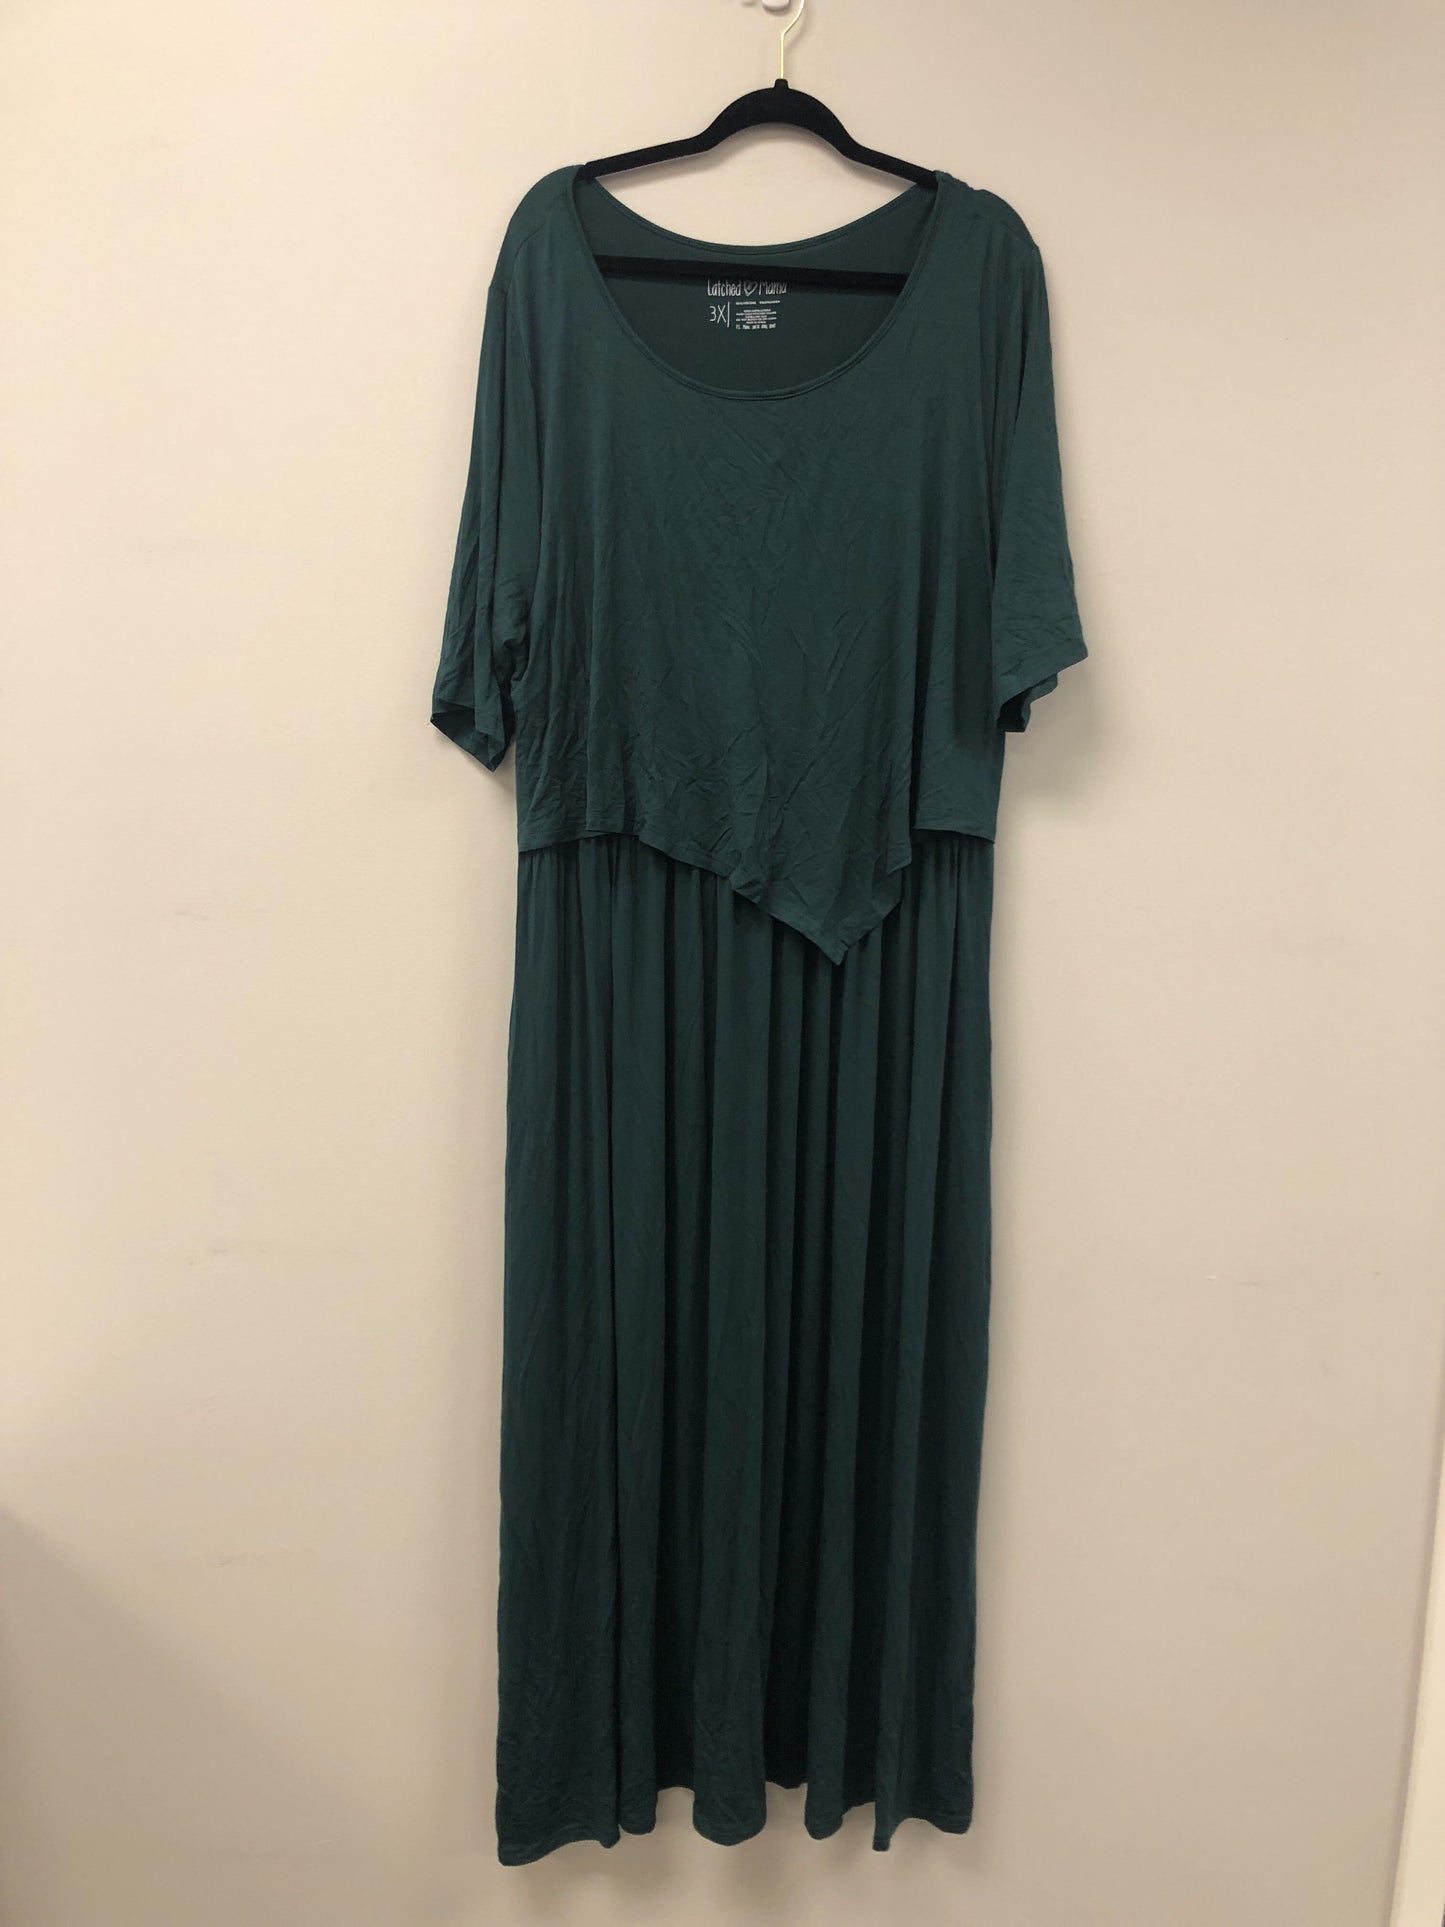 Outlet 5579 - Latched Mama Front Knot Nursing Maxi Dress - Forest Green - 3X